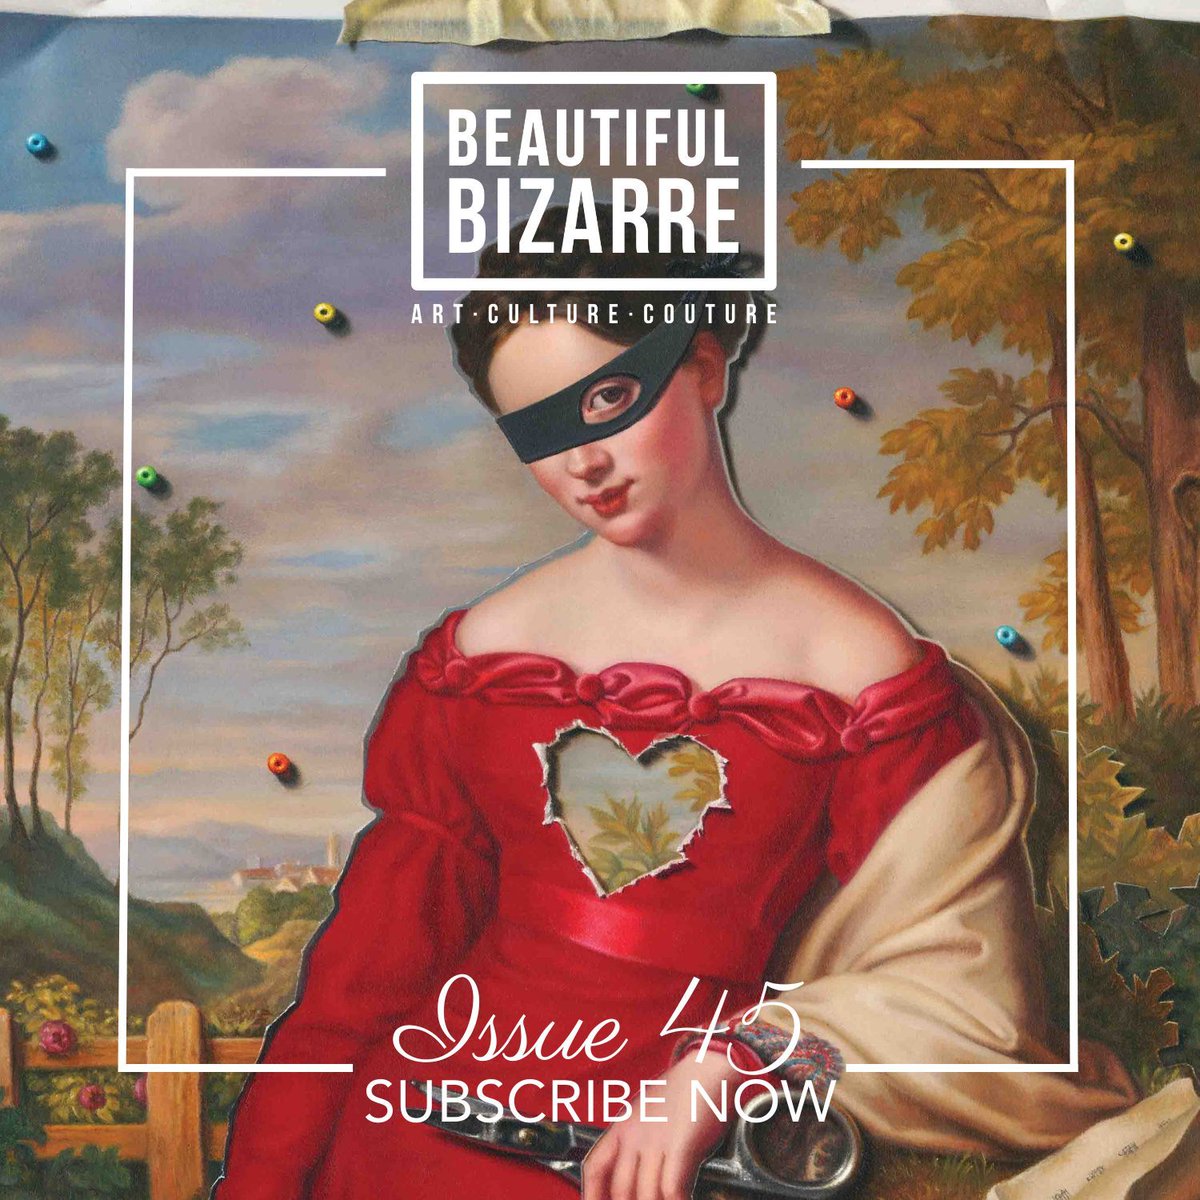 Read about Natalie Featherston and her work in the coming June issue of Beautiful Bizarre art magazine!

Never miss an issue again. Subscribe today > store.beautifulbizarre.net/product/12-mon…

#beautifulbizarre #artmagazine #artist #newcontemporaryart #artinspiration #oilpainting #trompeloeil